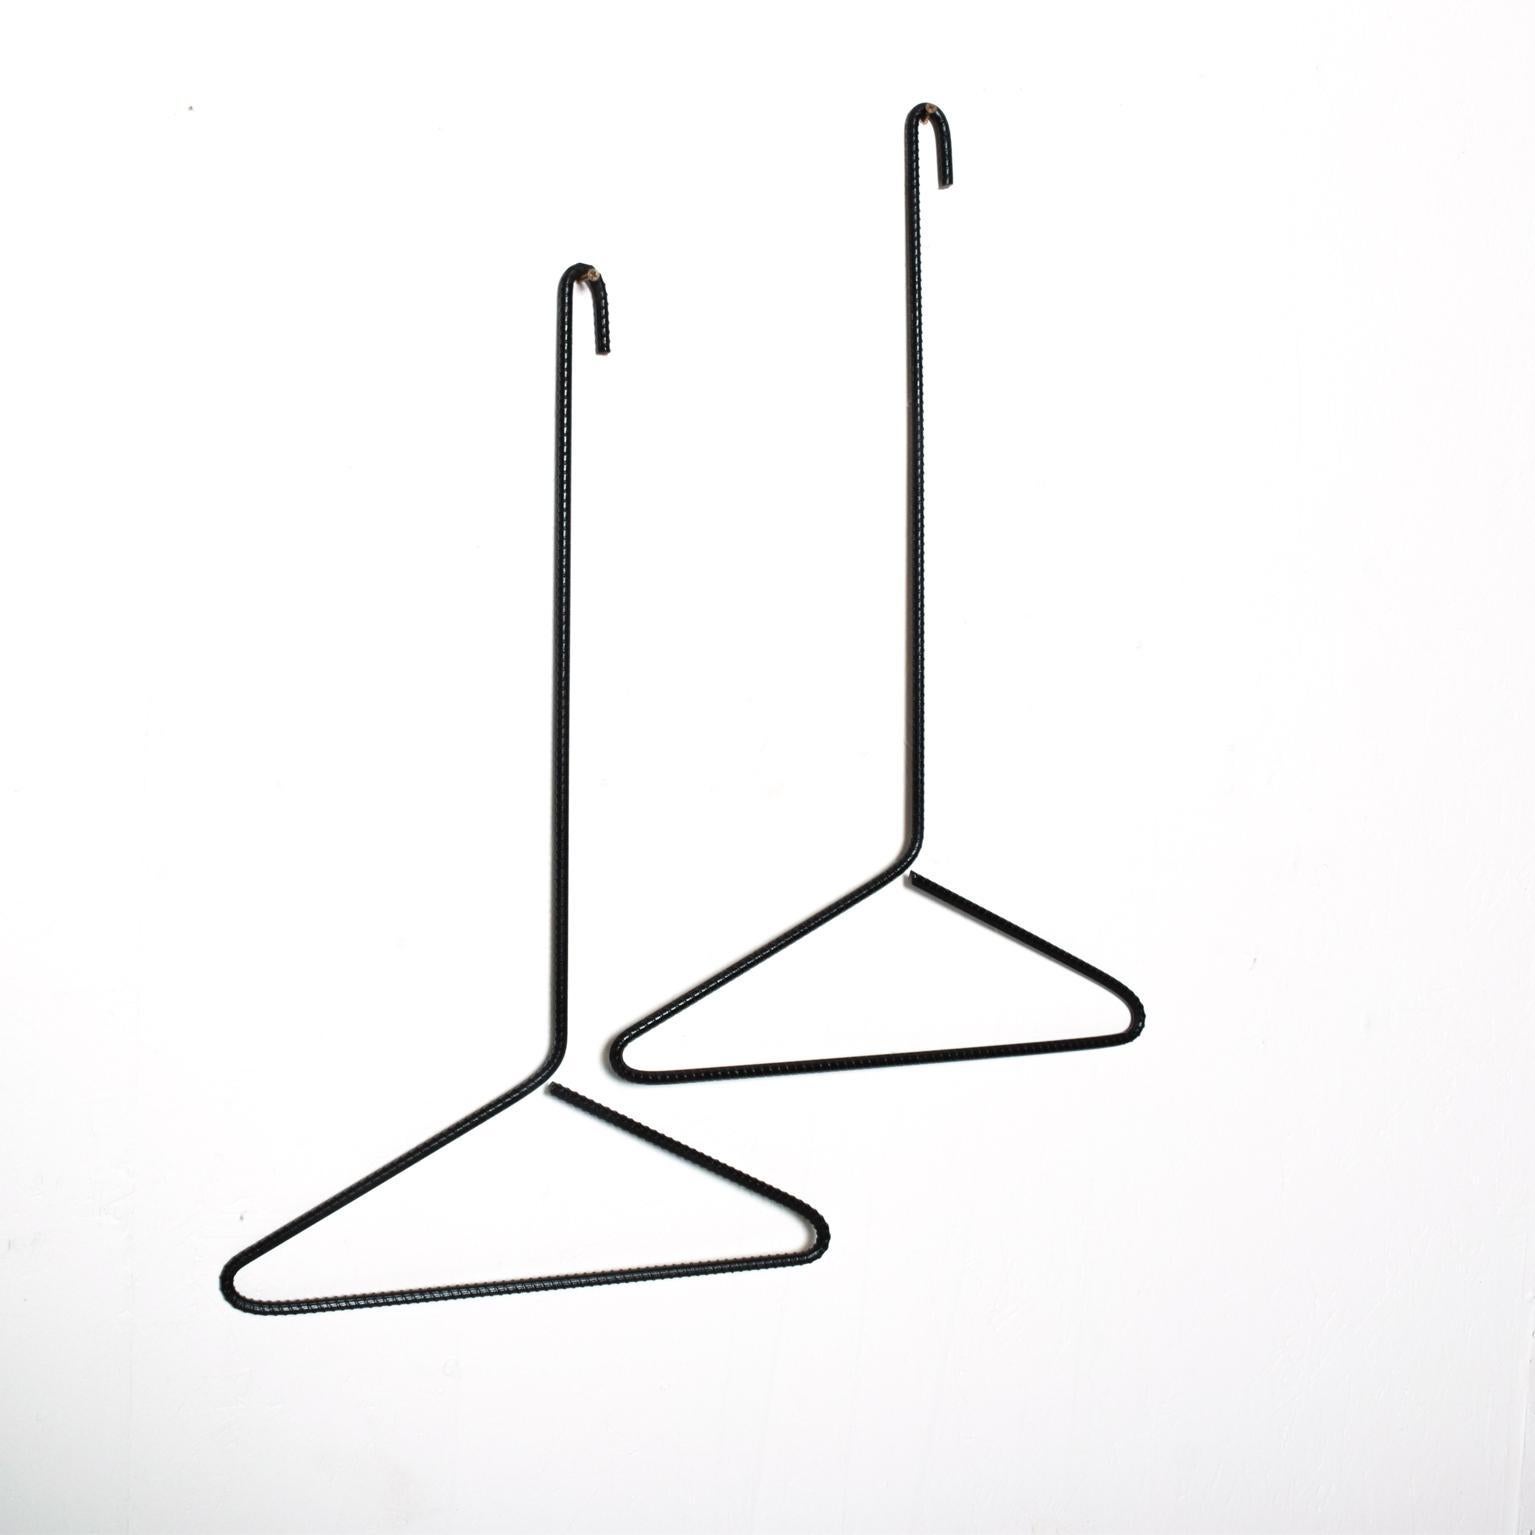 American Pair of Modern Coat Hangers Satin Black Sculptural Iron by Pablo Romo Ambianic